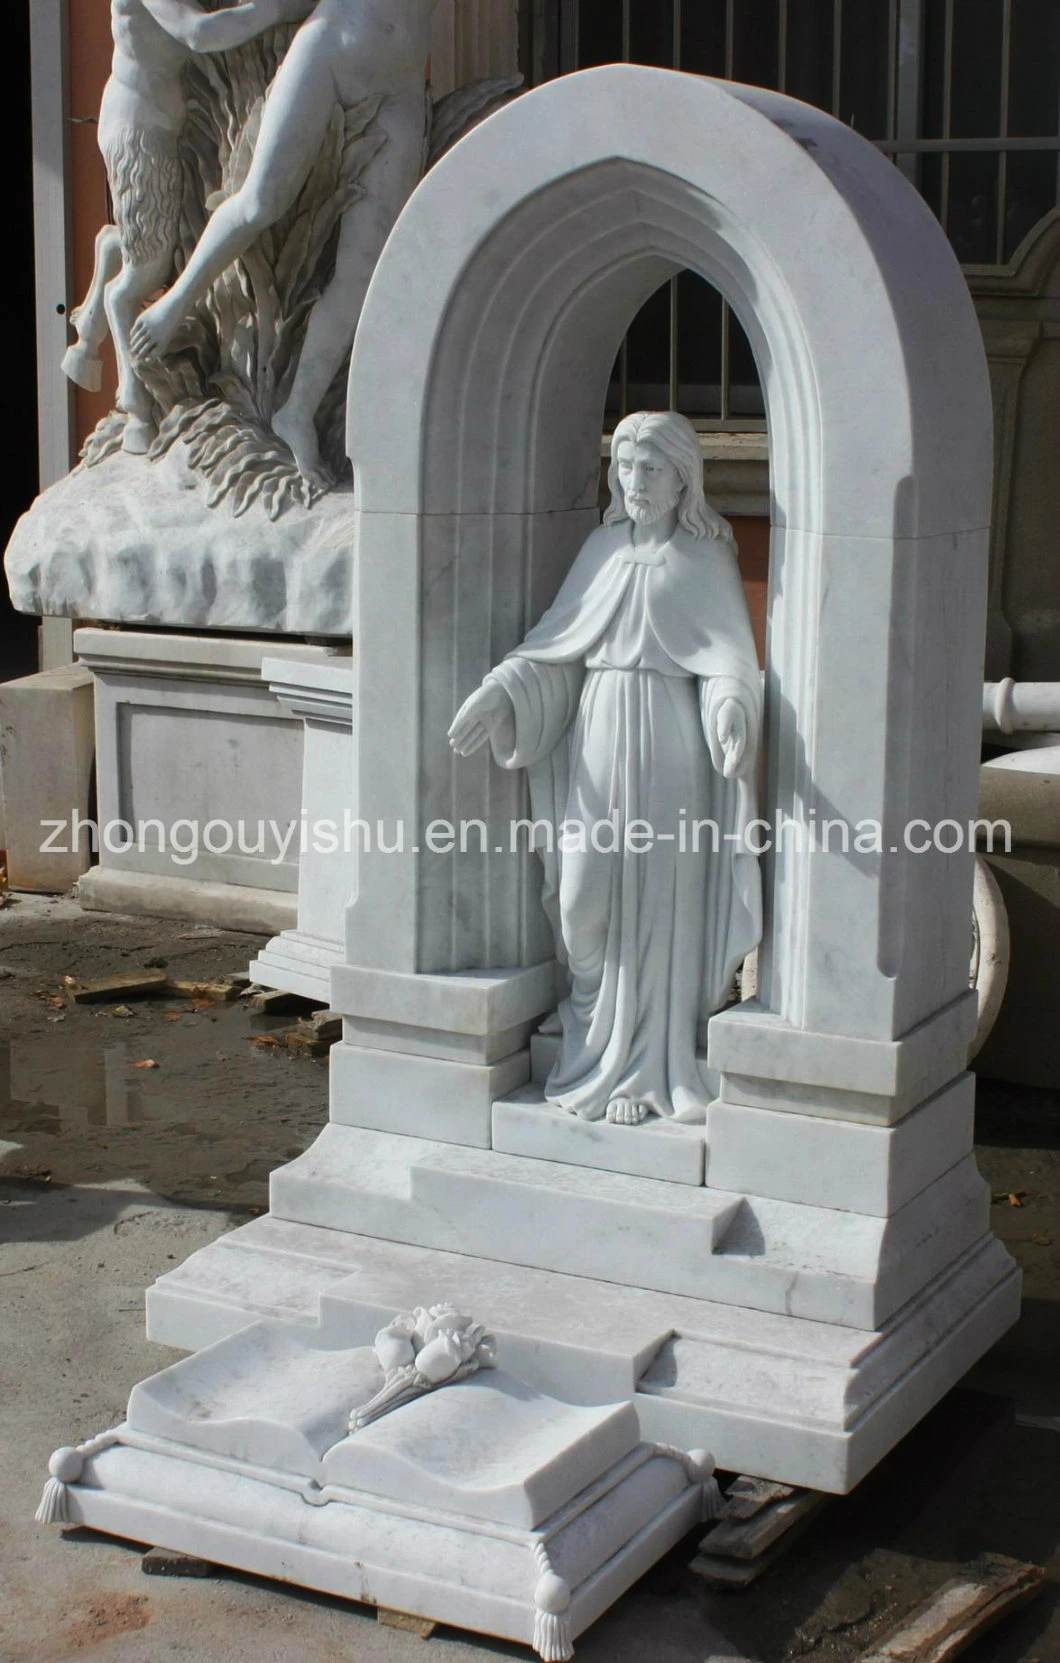 Marble Tombstones with Jesus, Monuments